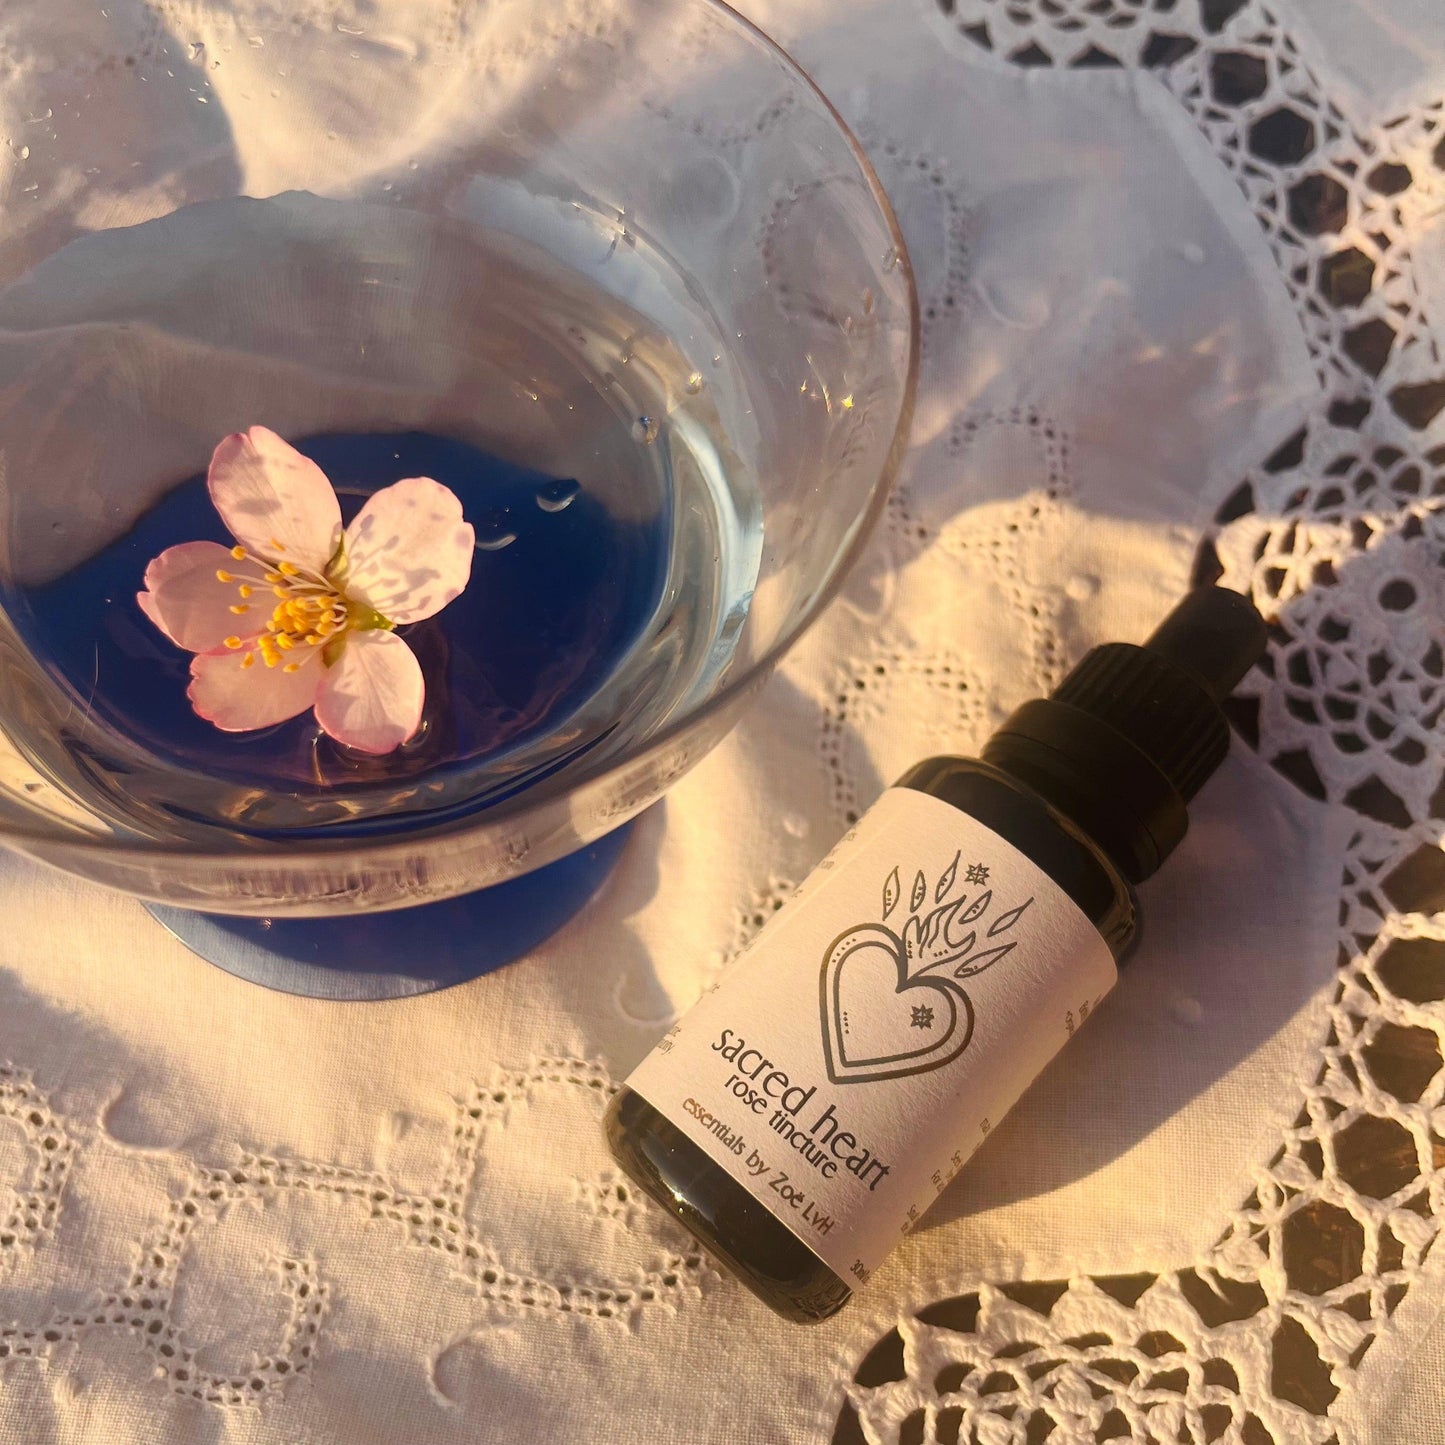 SACRED HEART - Rose Tincture